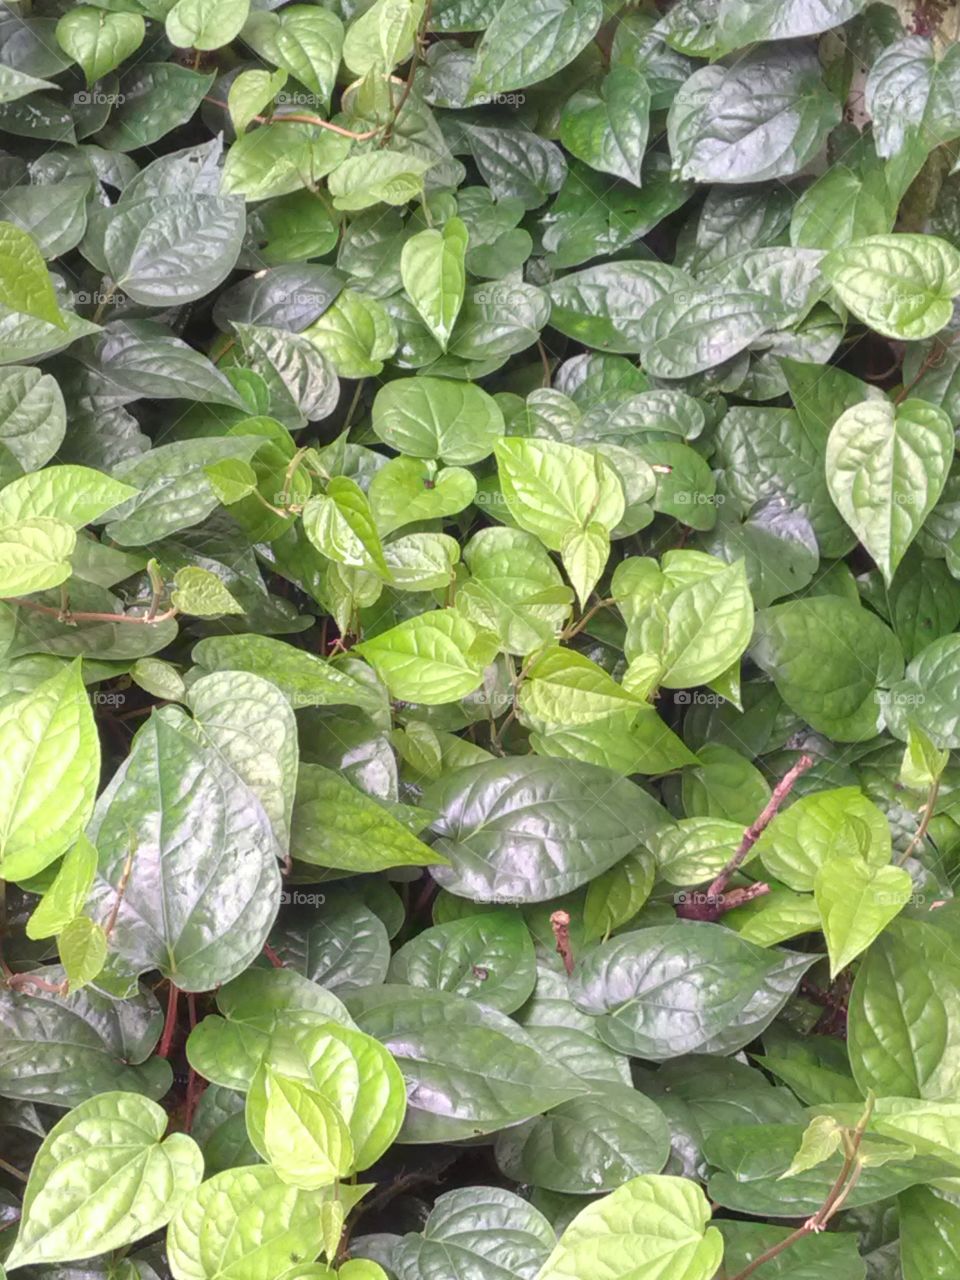 This is a very good leafs the name of betel.